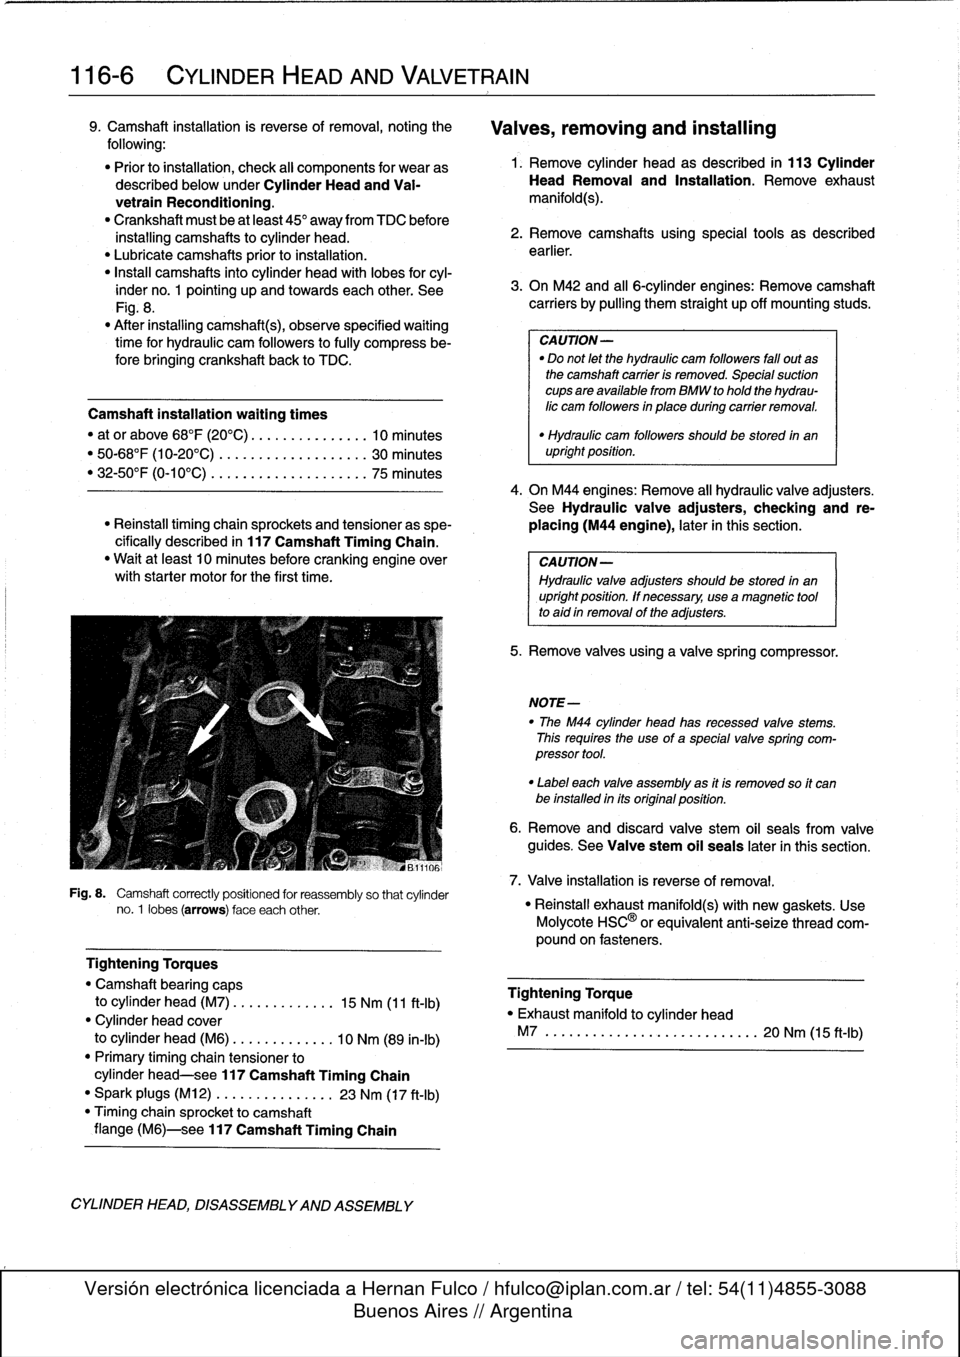 BMW 328i 1997 E36 User Guide 
116-
6

	

CYLINDER
HEAD
AND
VALVETRAIN

9
.
Camshaft
installation
is
reverse
of
removal,noting
the

following
:

"
Prior
to
installation,
check
al¡
components
for
wear
as
described
below
under
Cyli